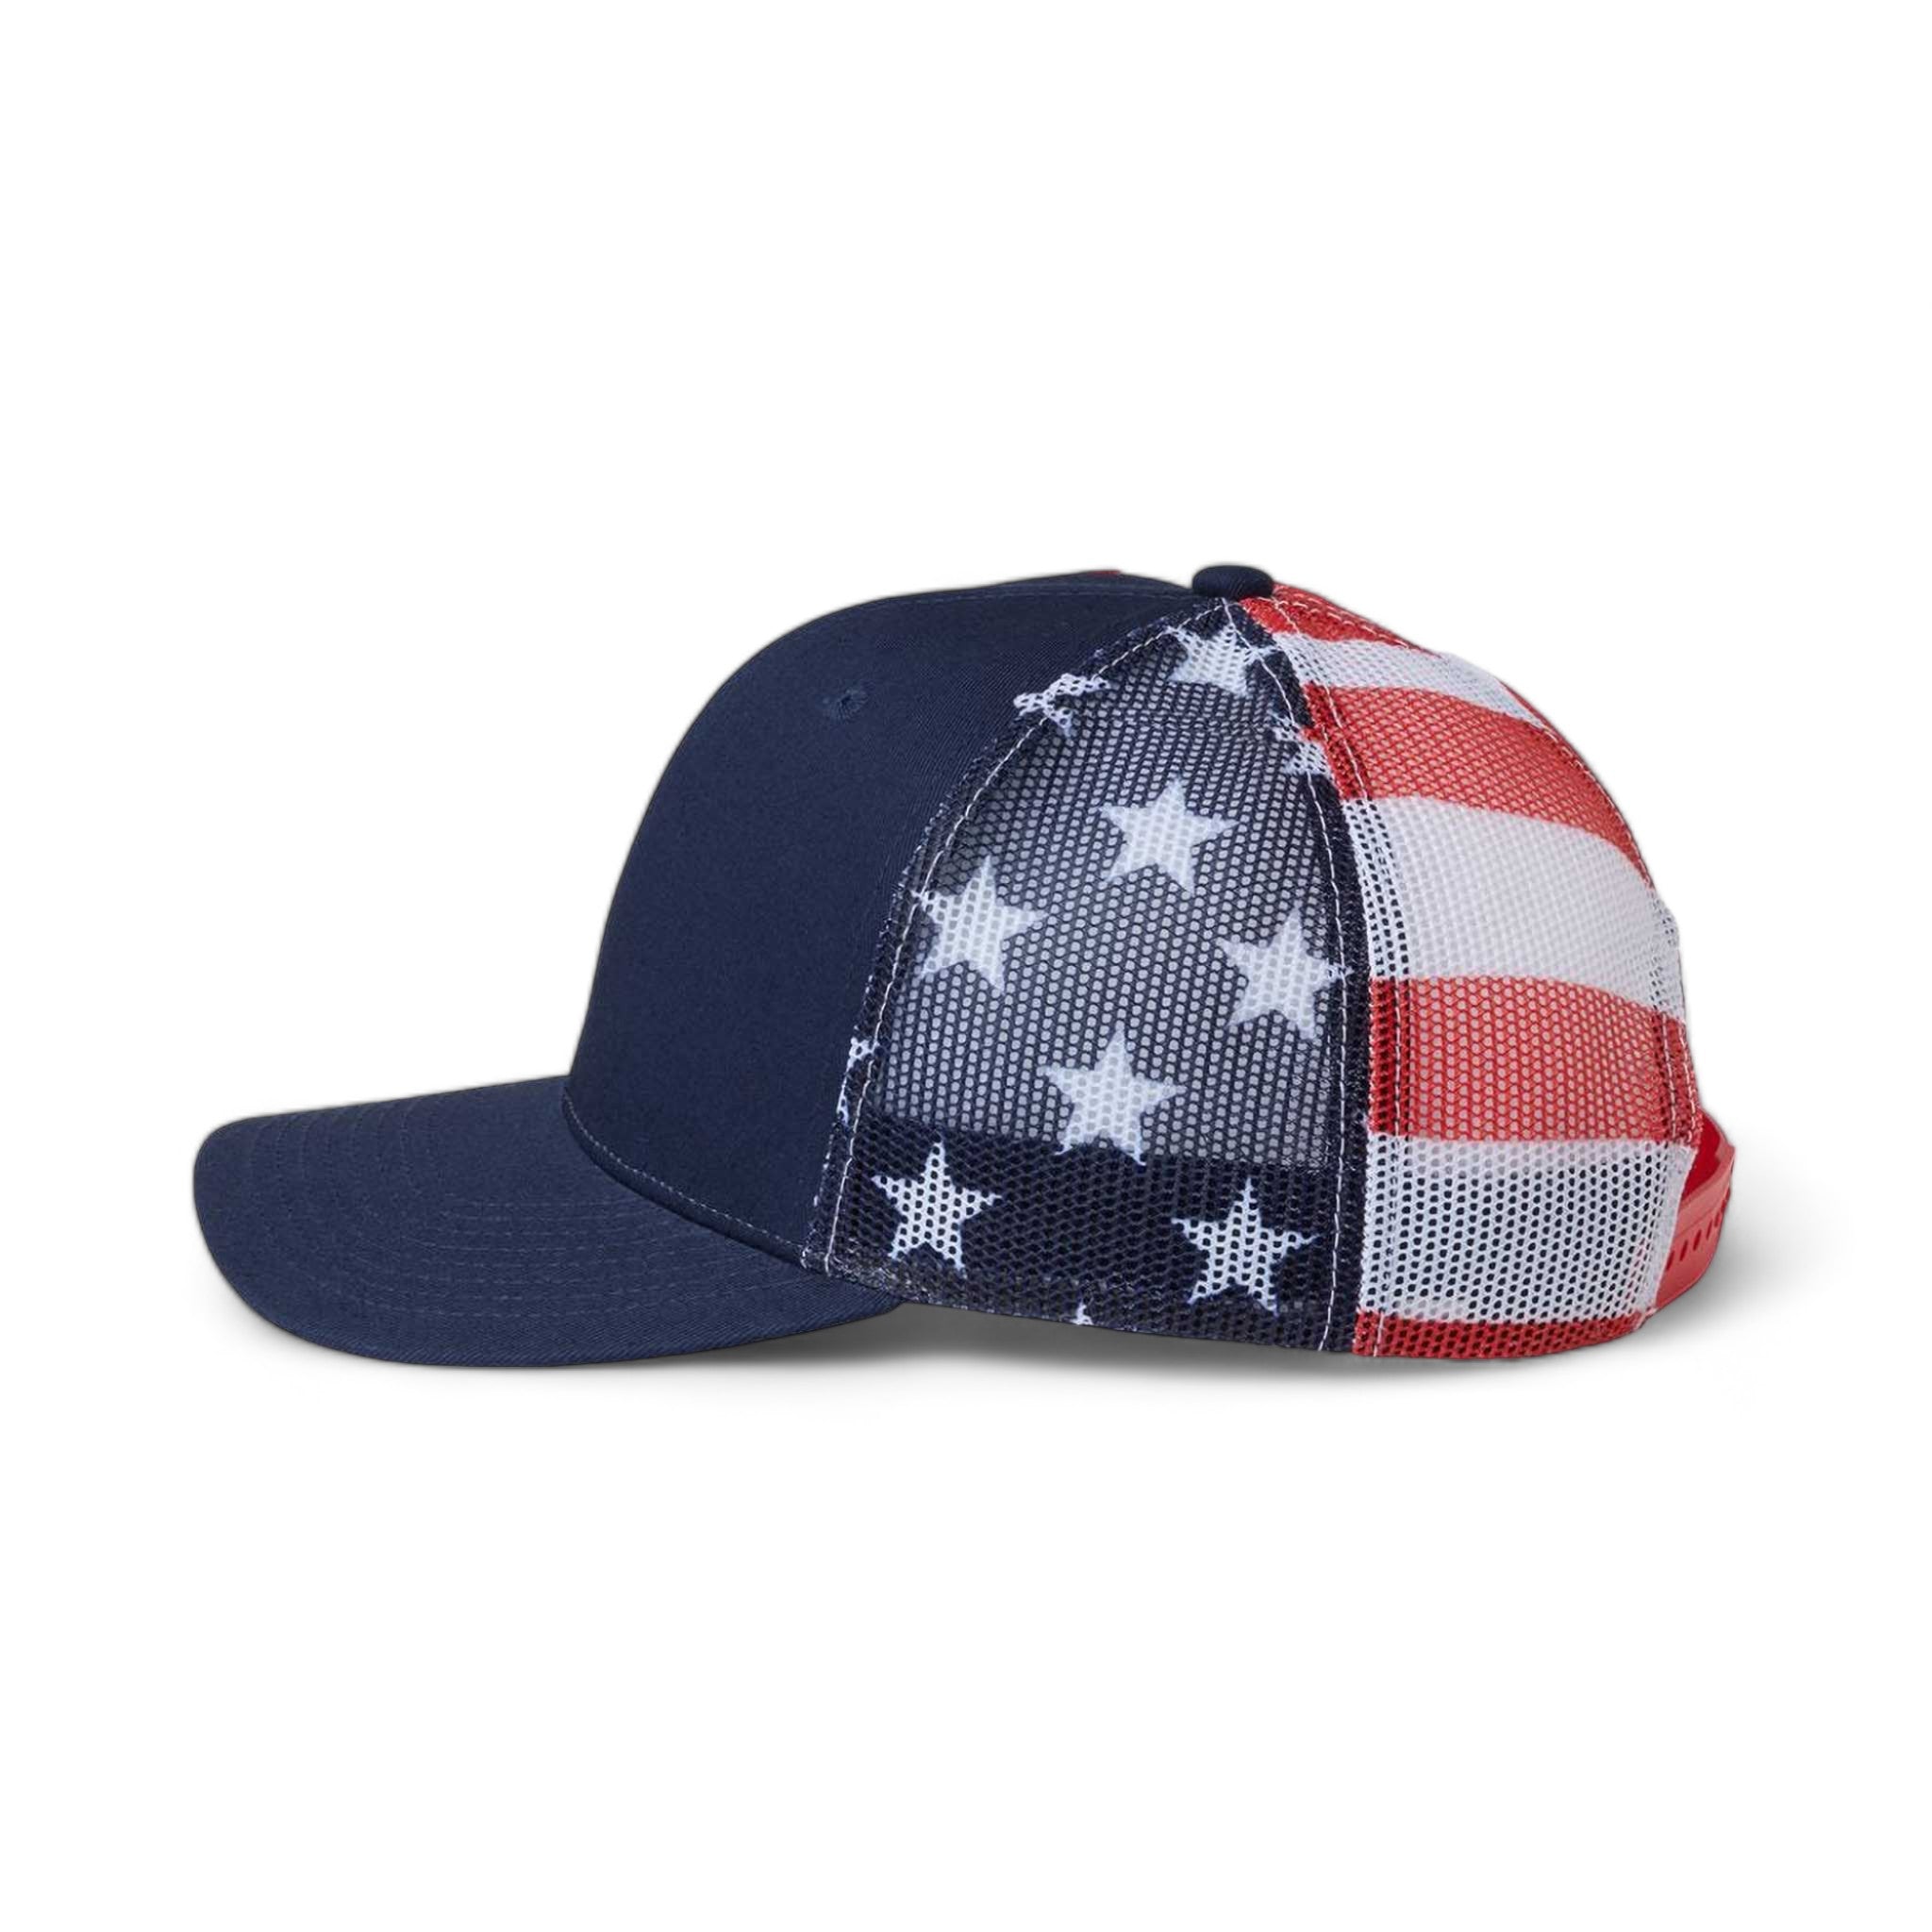 Side view of Kati S700M custom hat in navy and usa flag